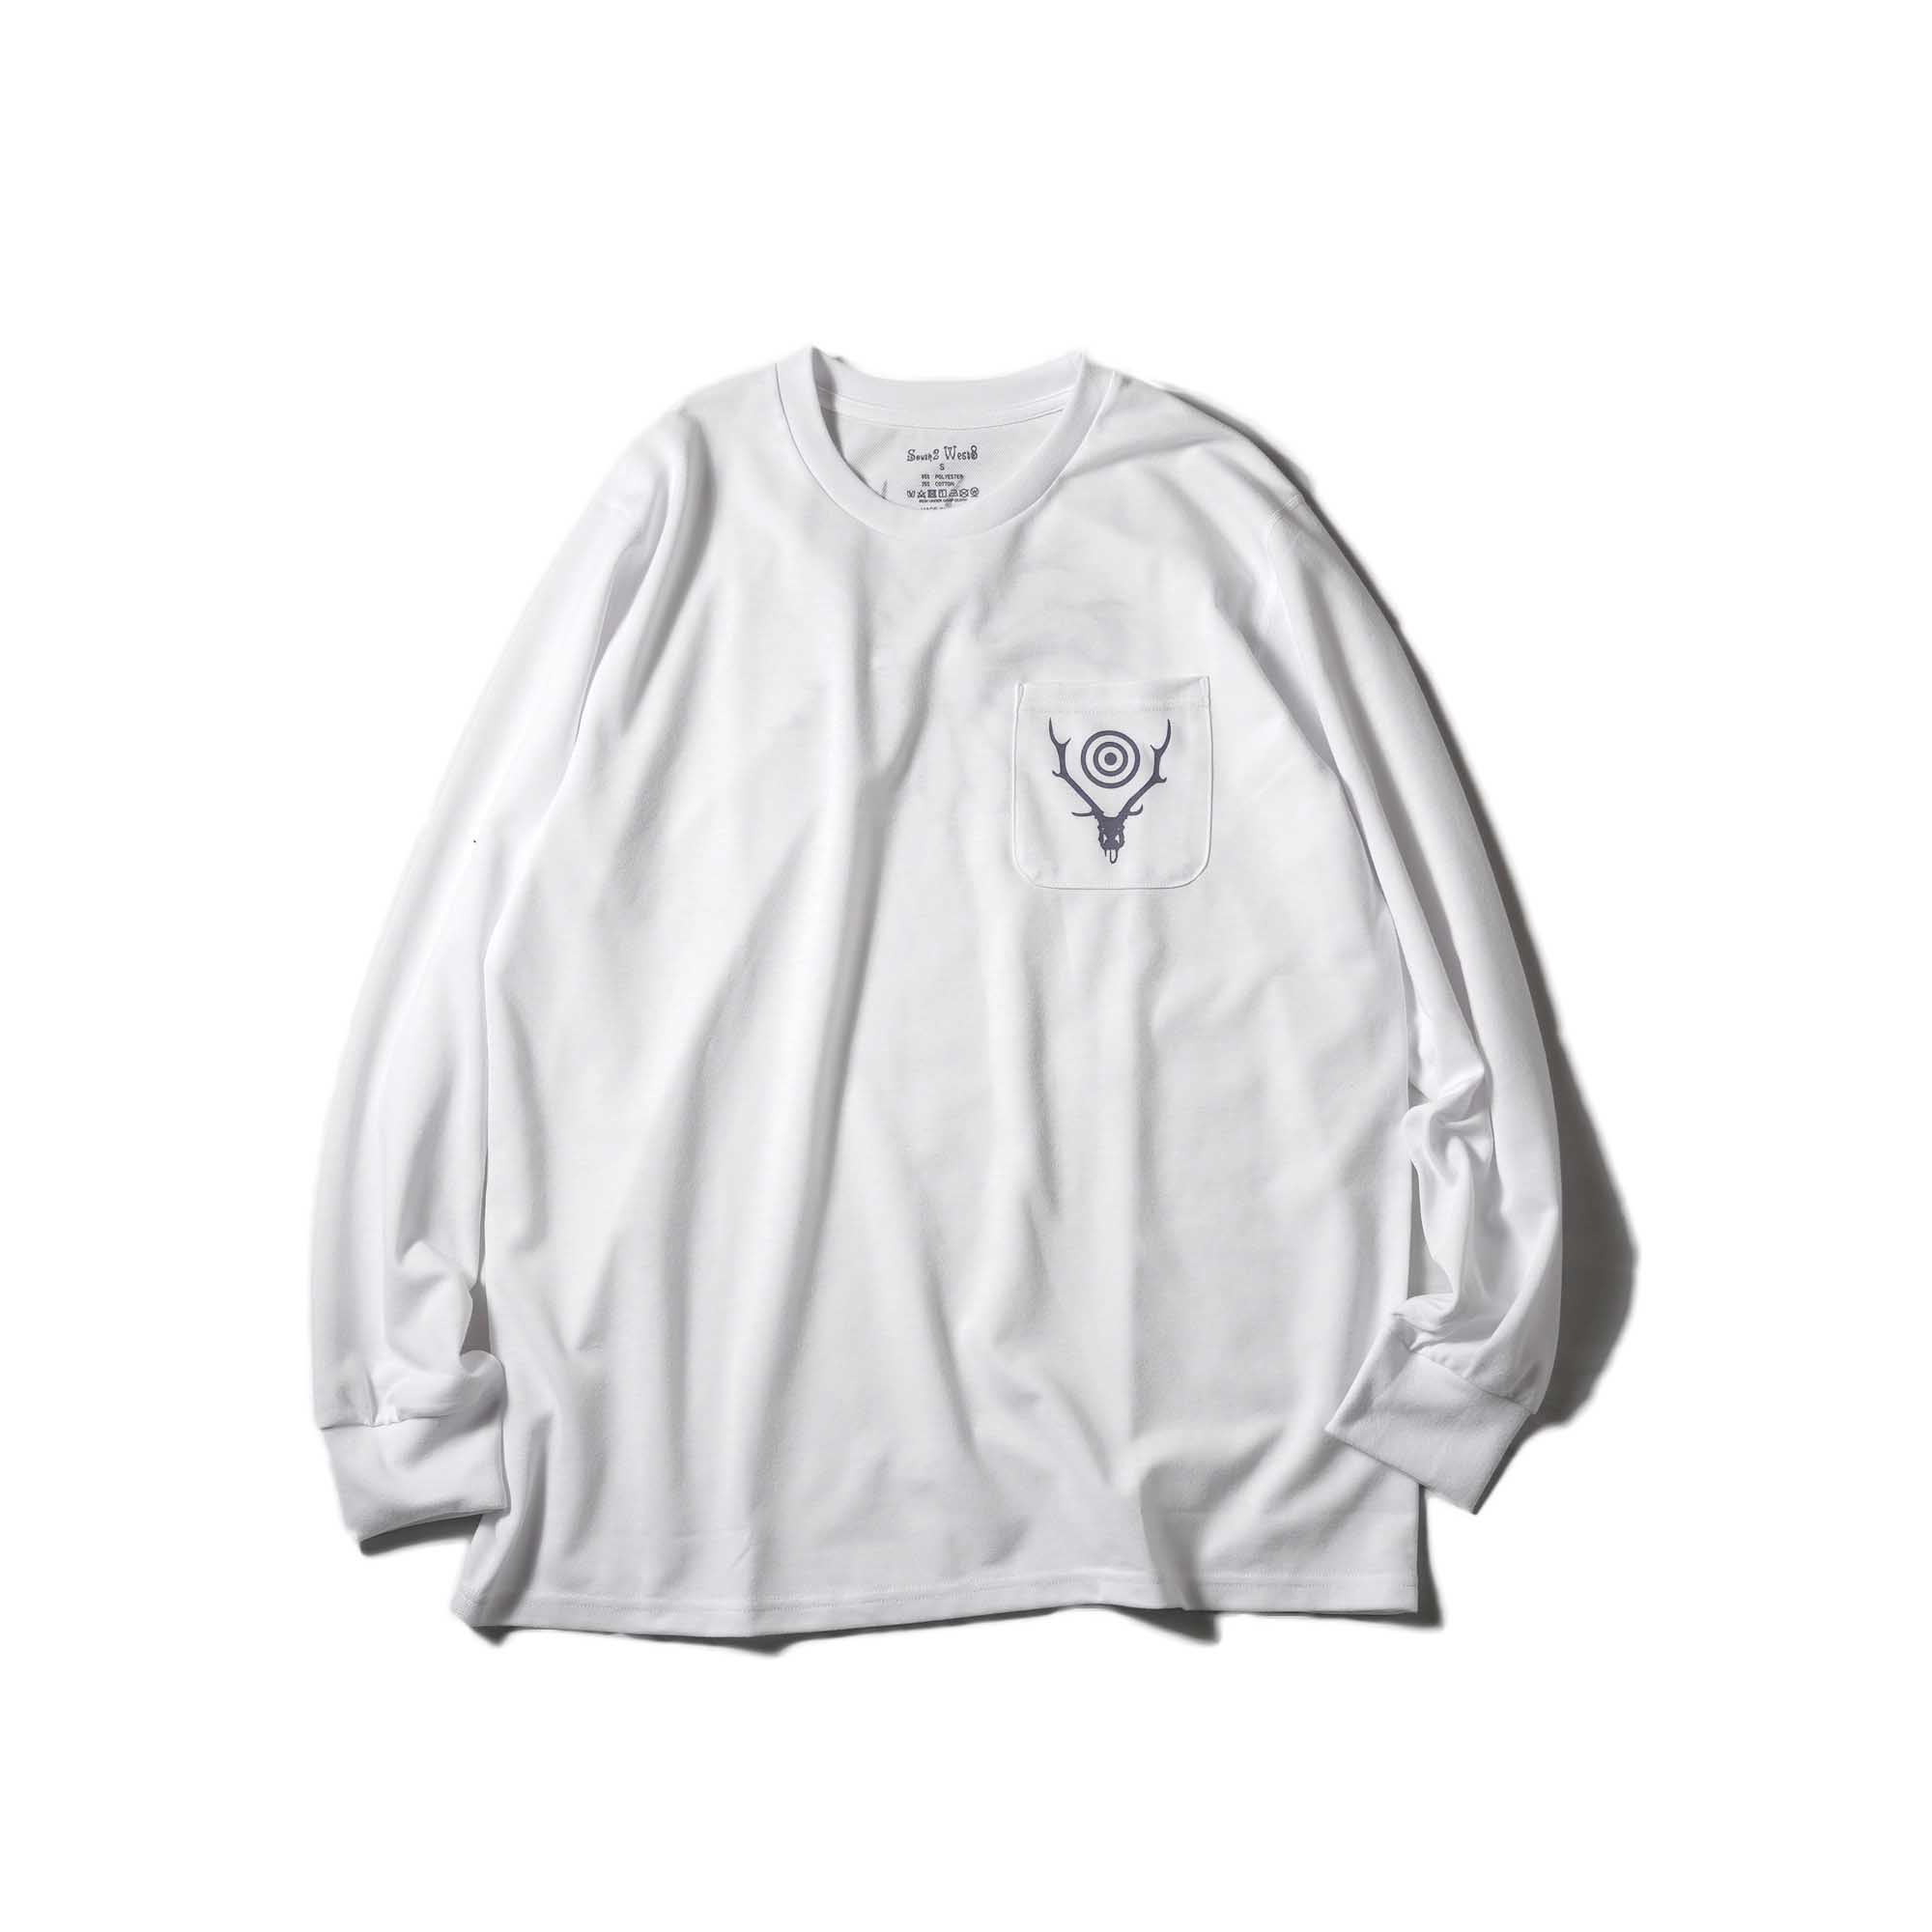 South2 West8 / L/S Round Pocket Tee -Circle Horn (White)